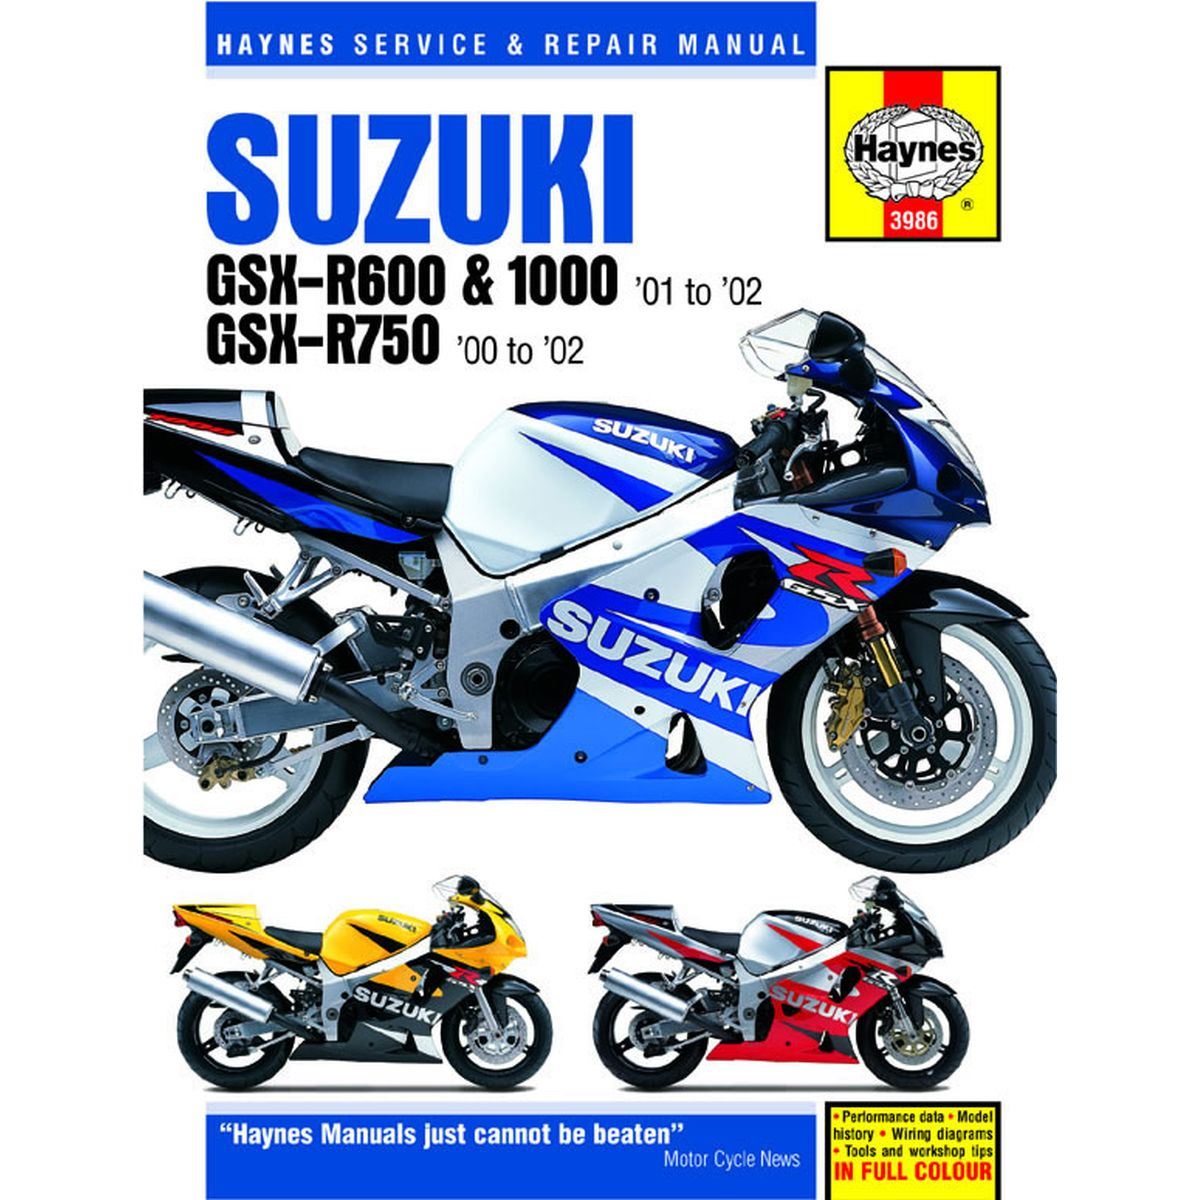 Suzuki Gsxr 1000 Wiring Diagram Free Color Download from goldfrenbrakes.co.uk